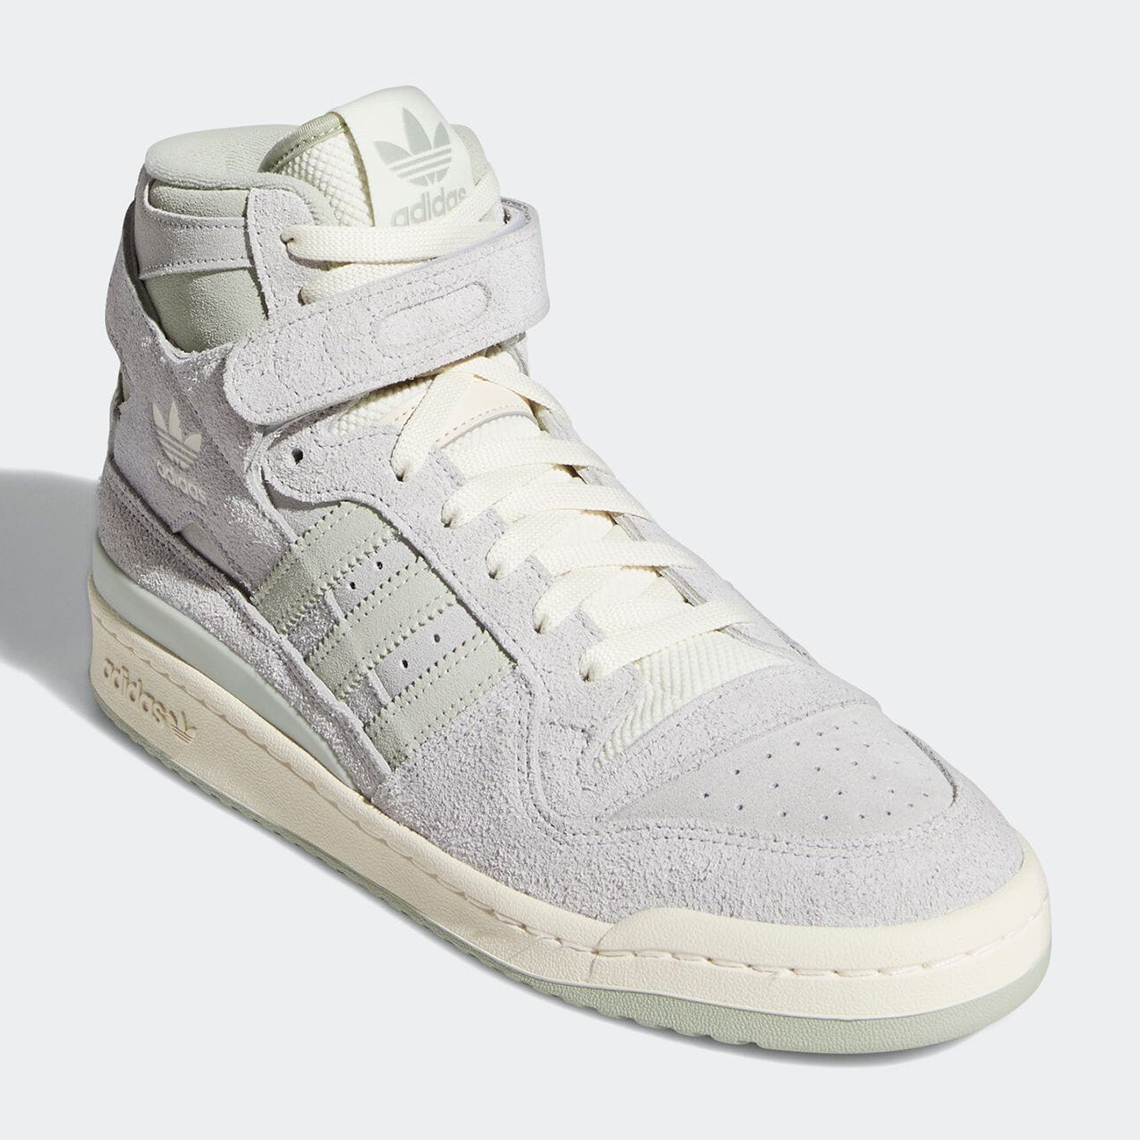 Adidas Forum 84 Hi Grey Two H04354 Release Date 2